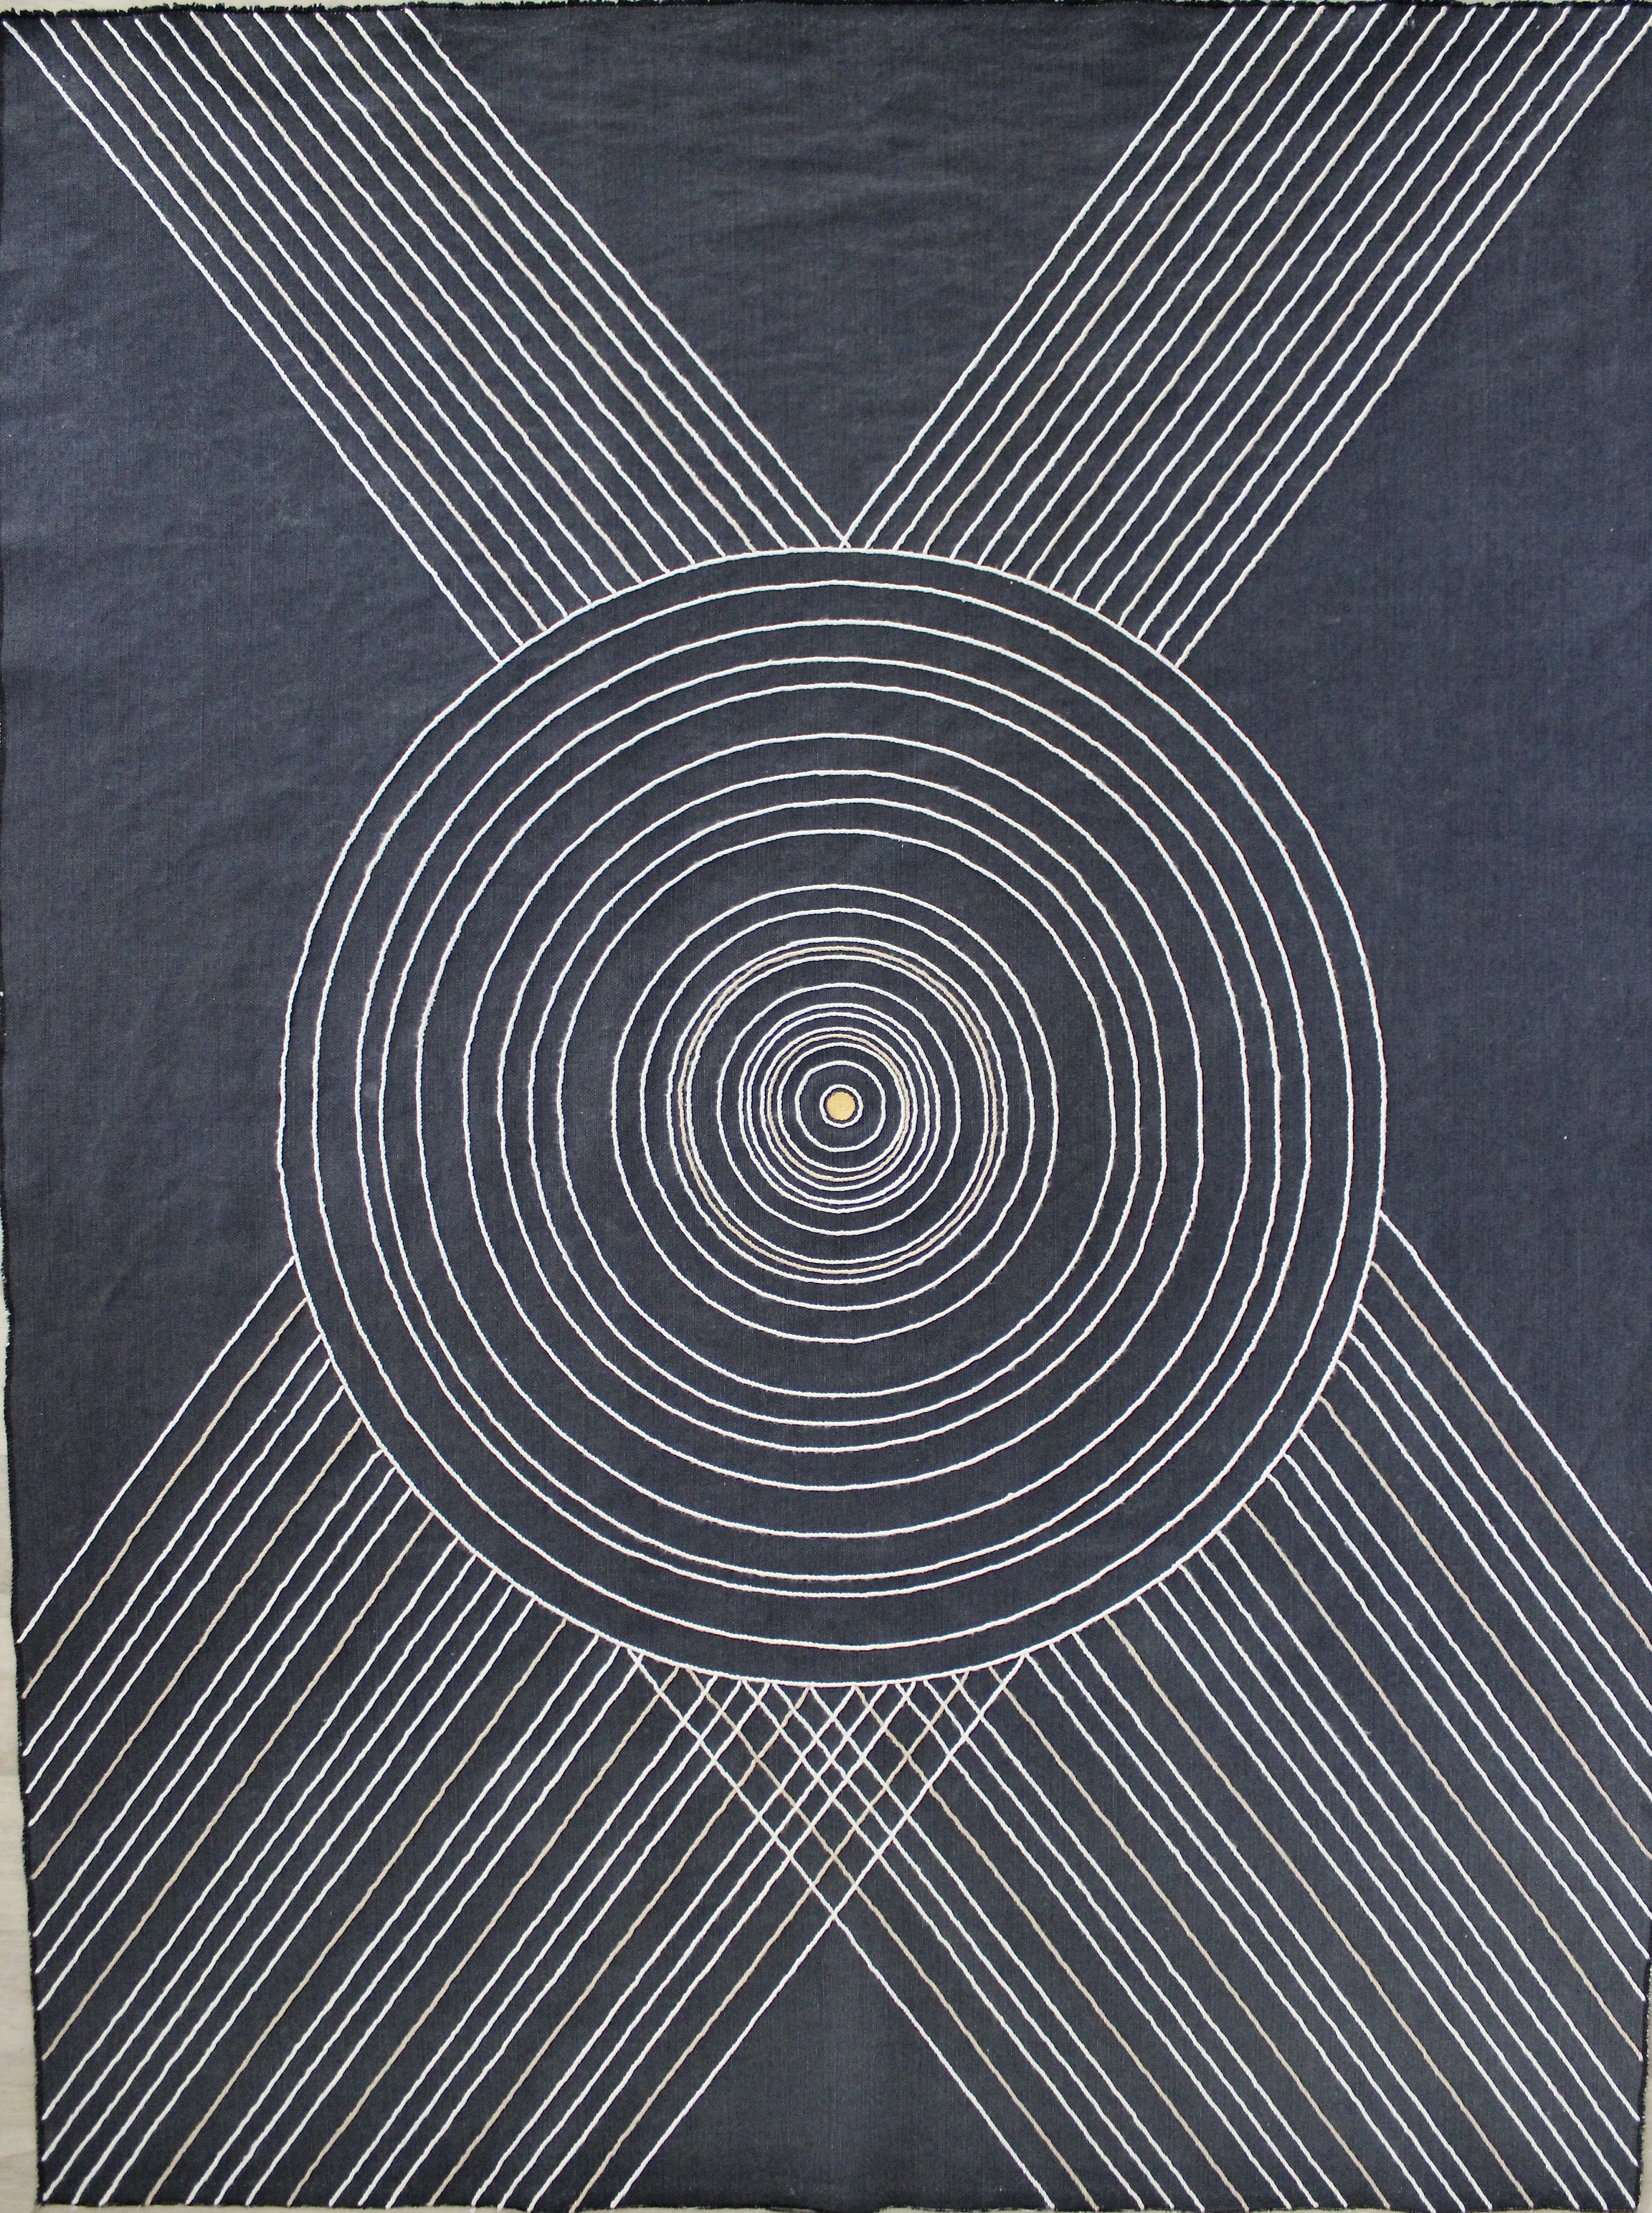 Hand embroidery, acrylic on linen/cotton 1m x 1.40m